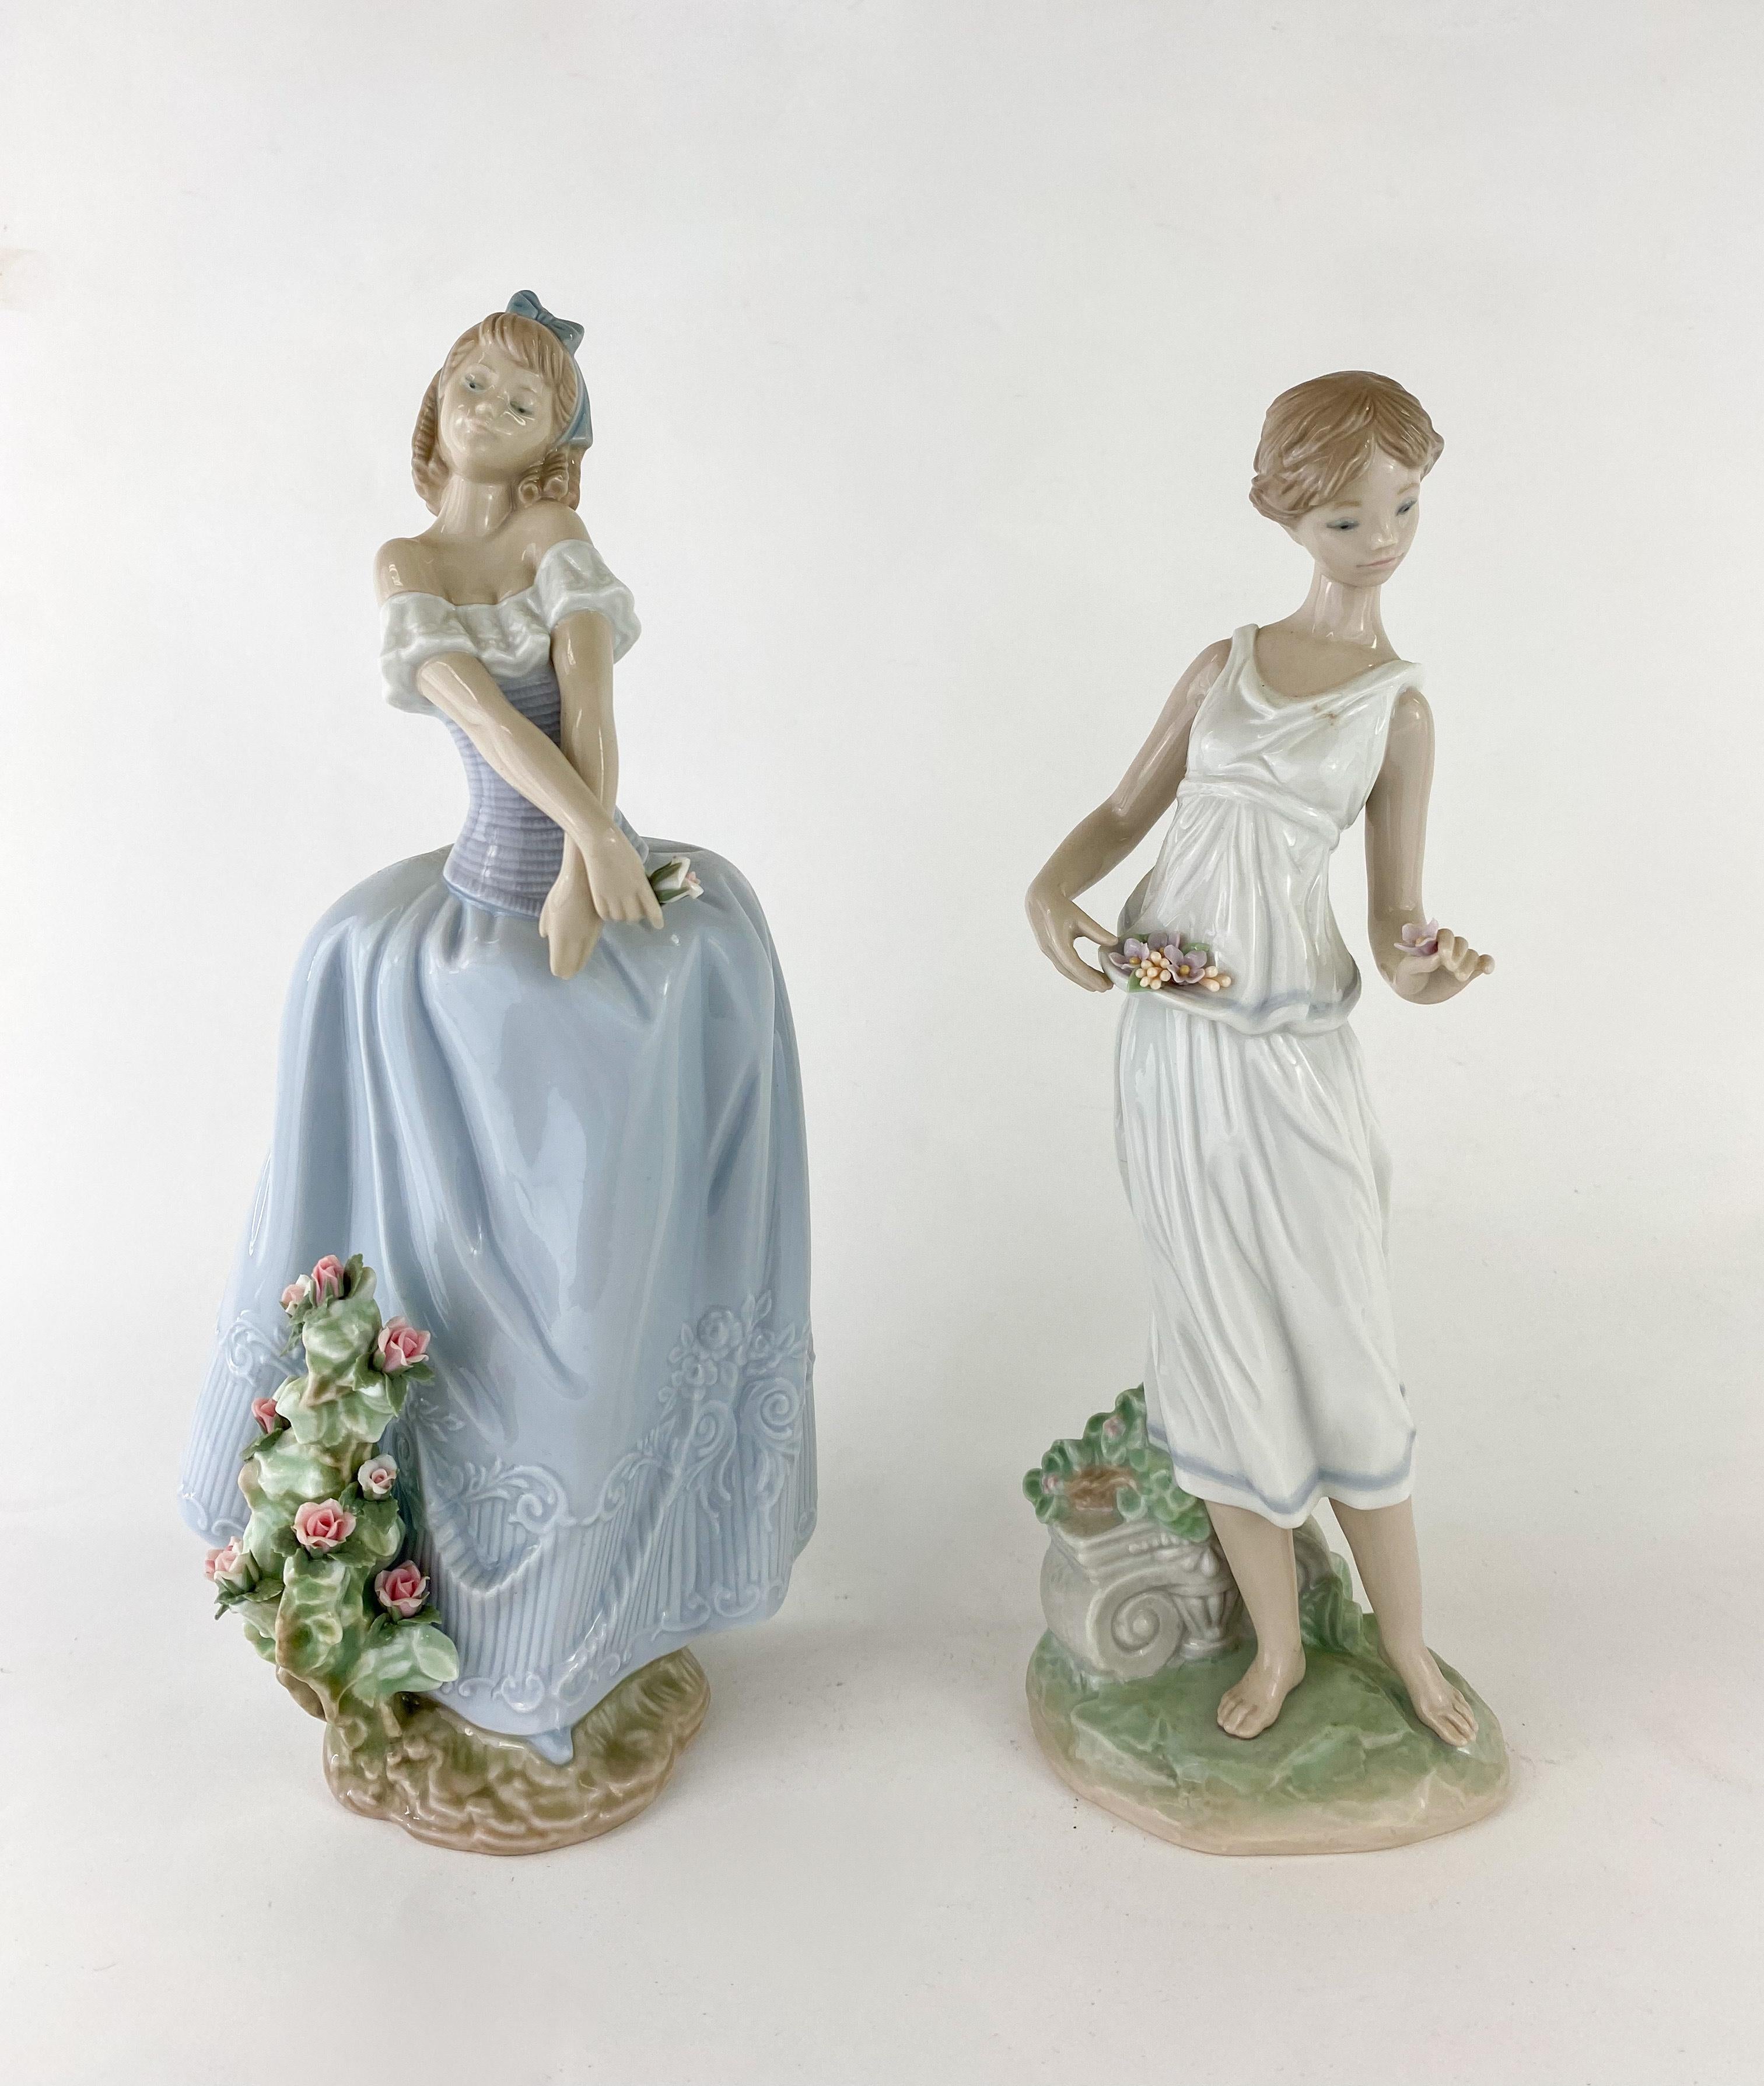 A set of two LLadro figurines. One is 